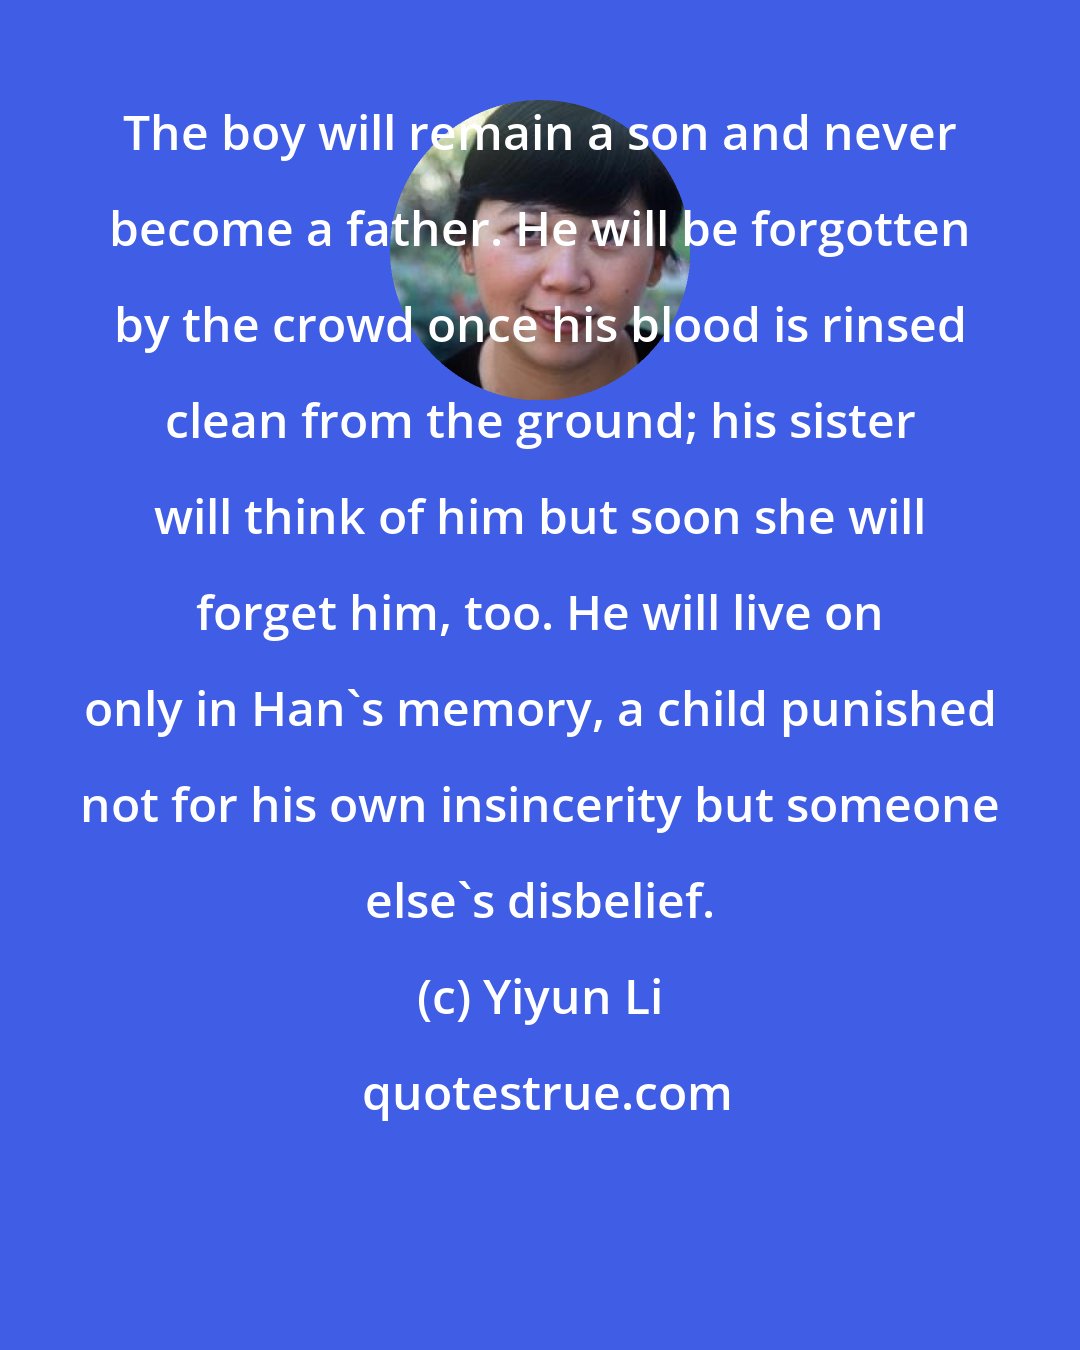 Yiyun Li: The boy will remain a son and never become a father. He will be forgotten by the crowd once his blood is rinsed clean from the ground; his sister will think of him but soon she will forget him, too. He will live on only in Han's memory, a child punished not for his own insincerity but someone else's disbelief.